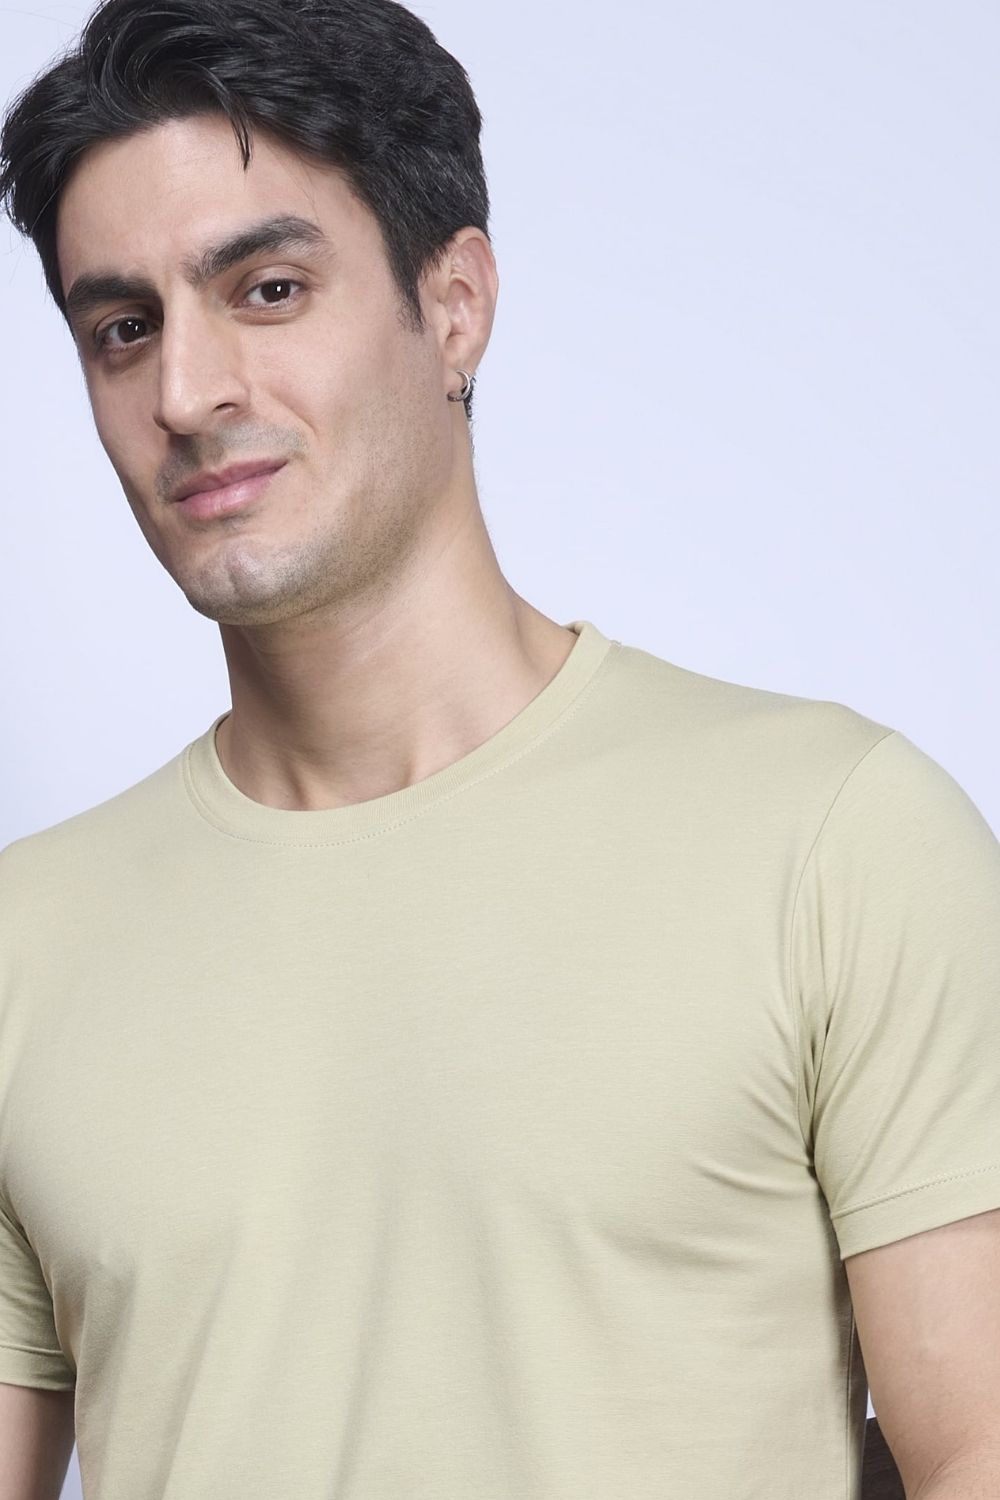 Cotton Stretch T shirt for men in the the solid color pale green with half sleeves and round neck.